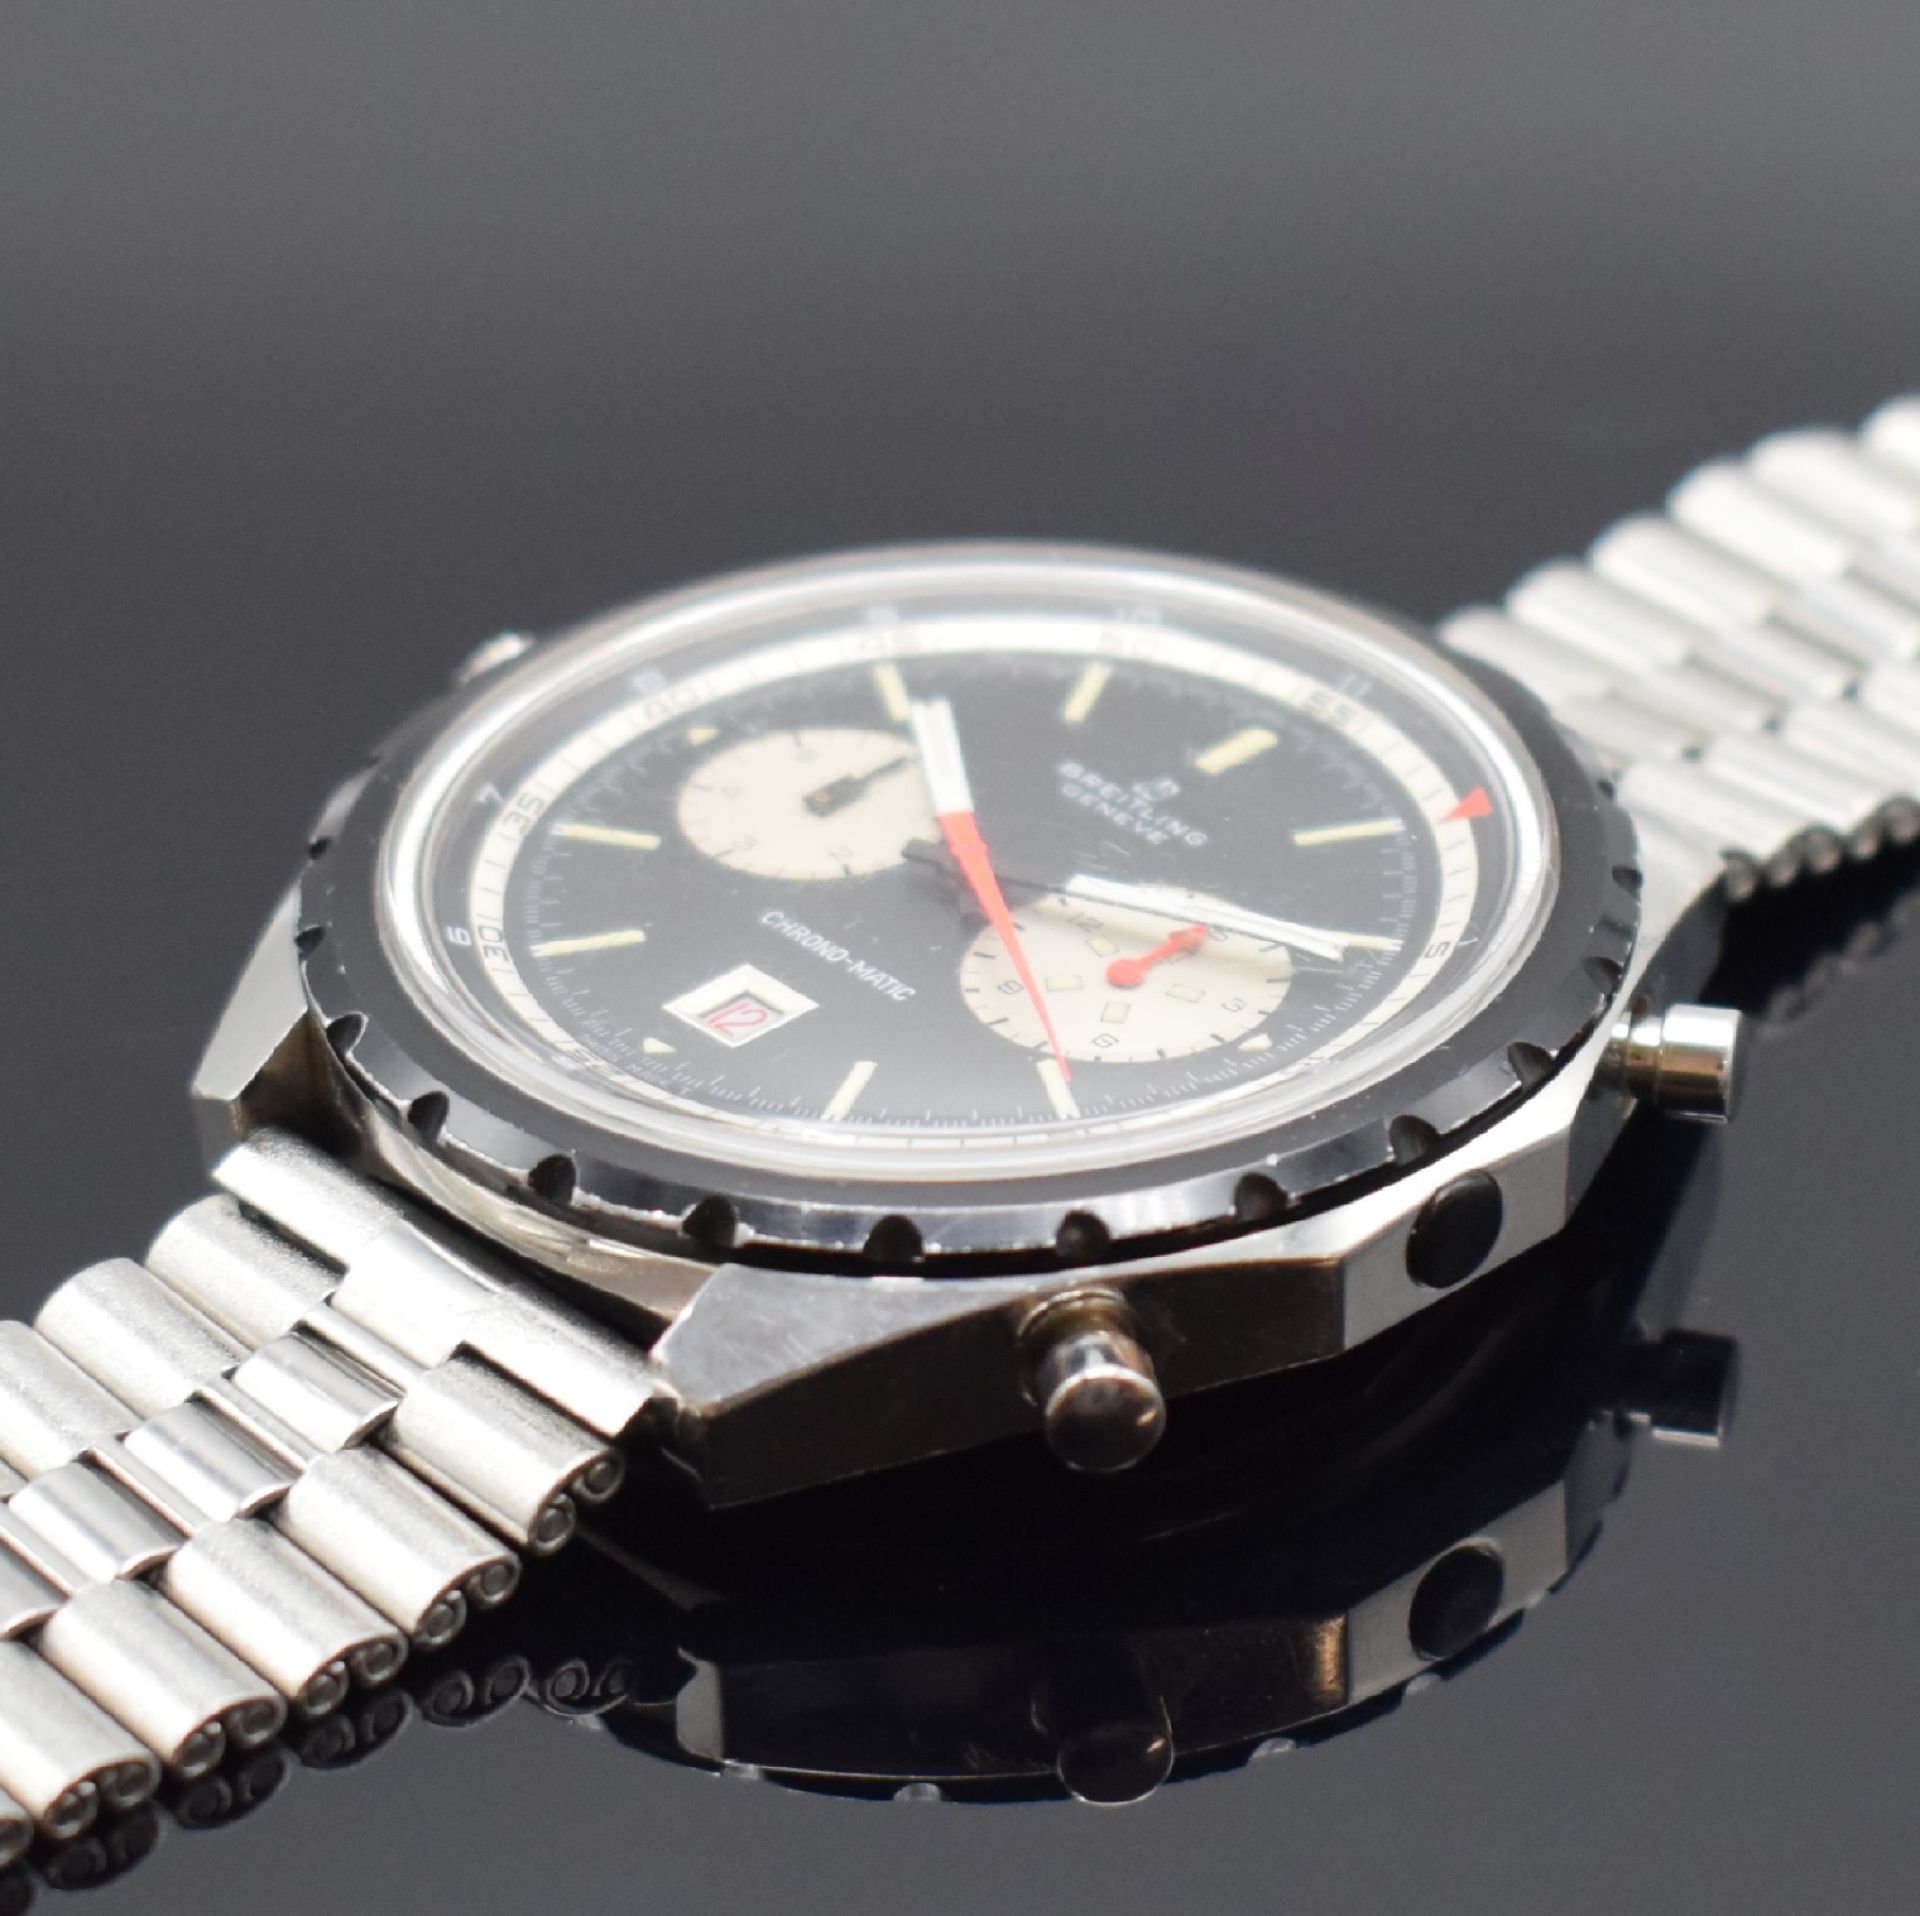 BREITLING Chrono-Matic Referenz 7651 seltener - Image 4 of 5